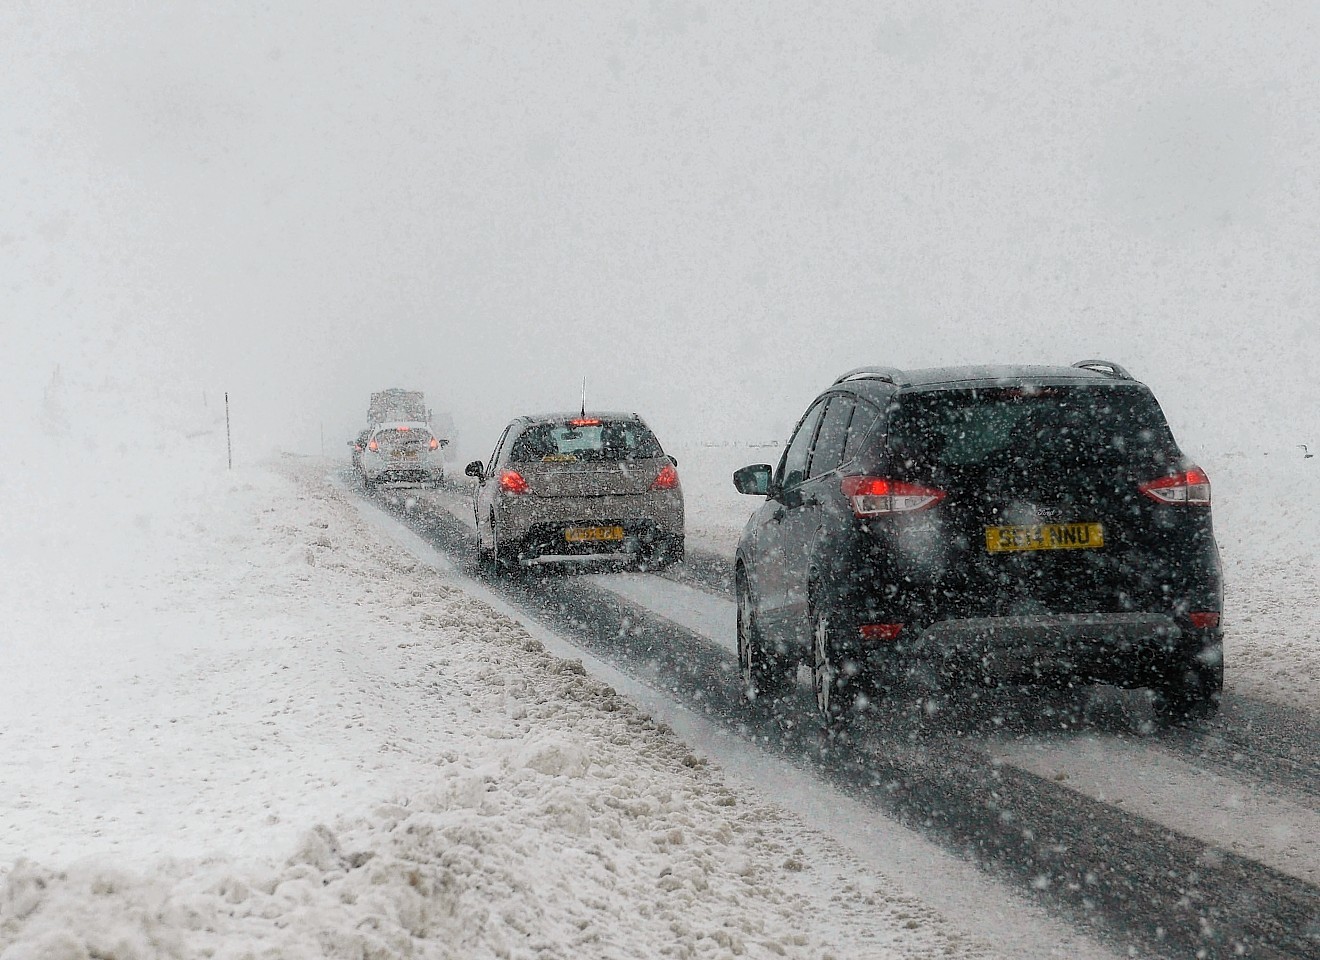 Drivers are encouraged to avoid the Drumochter Pass due to heavy snowfall